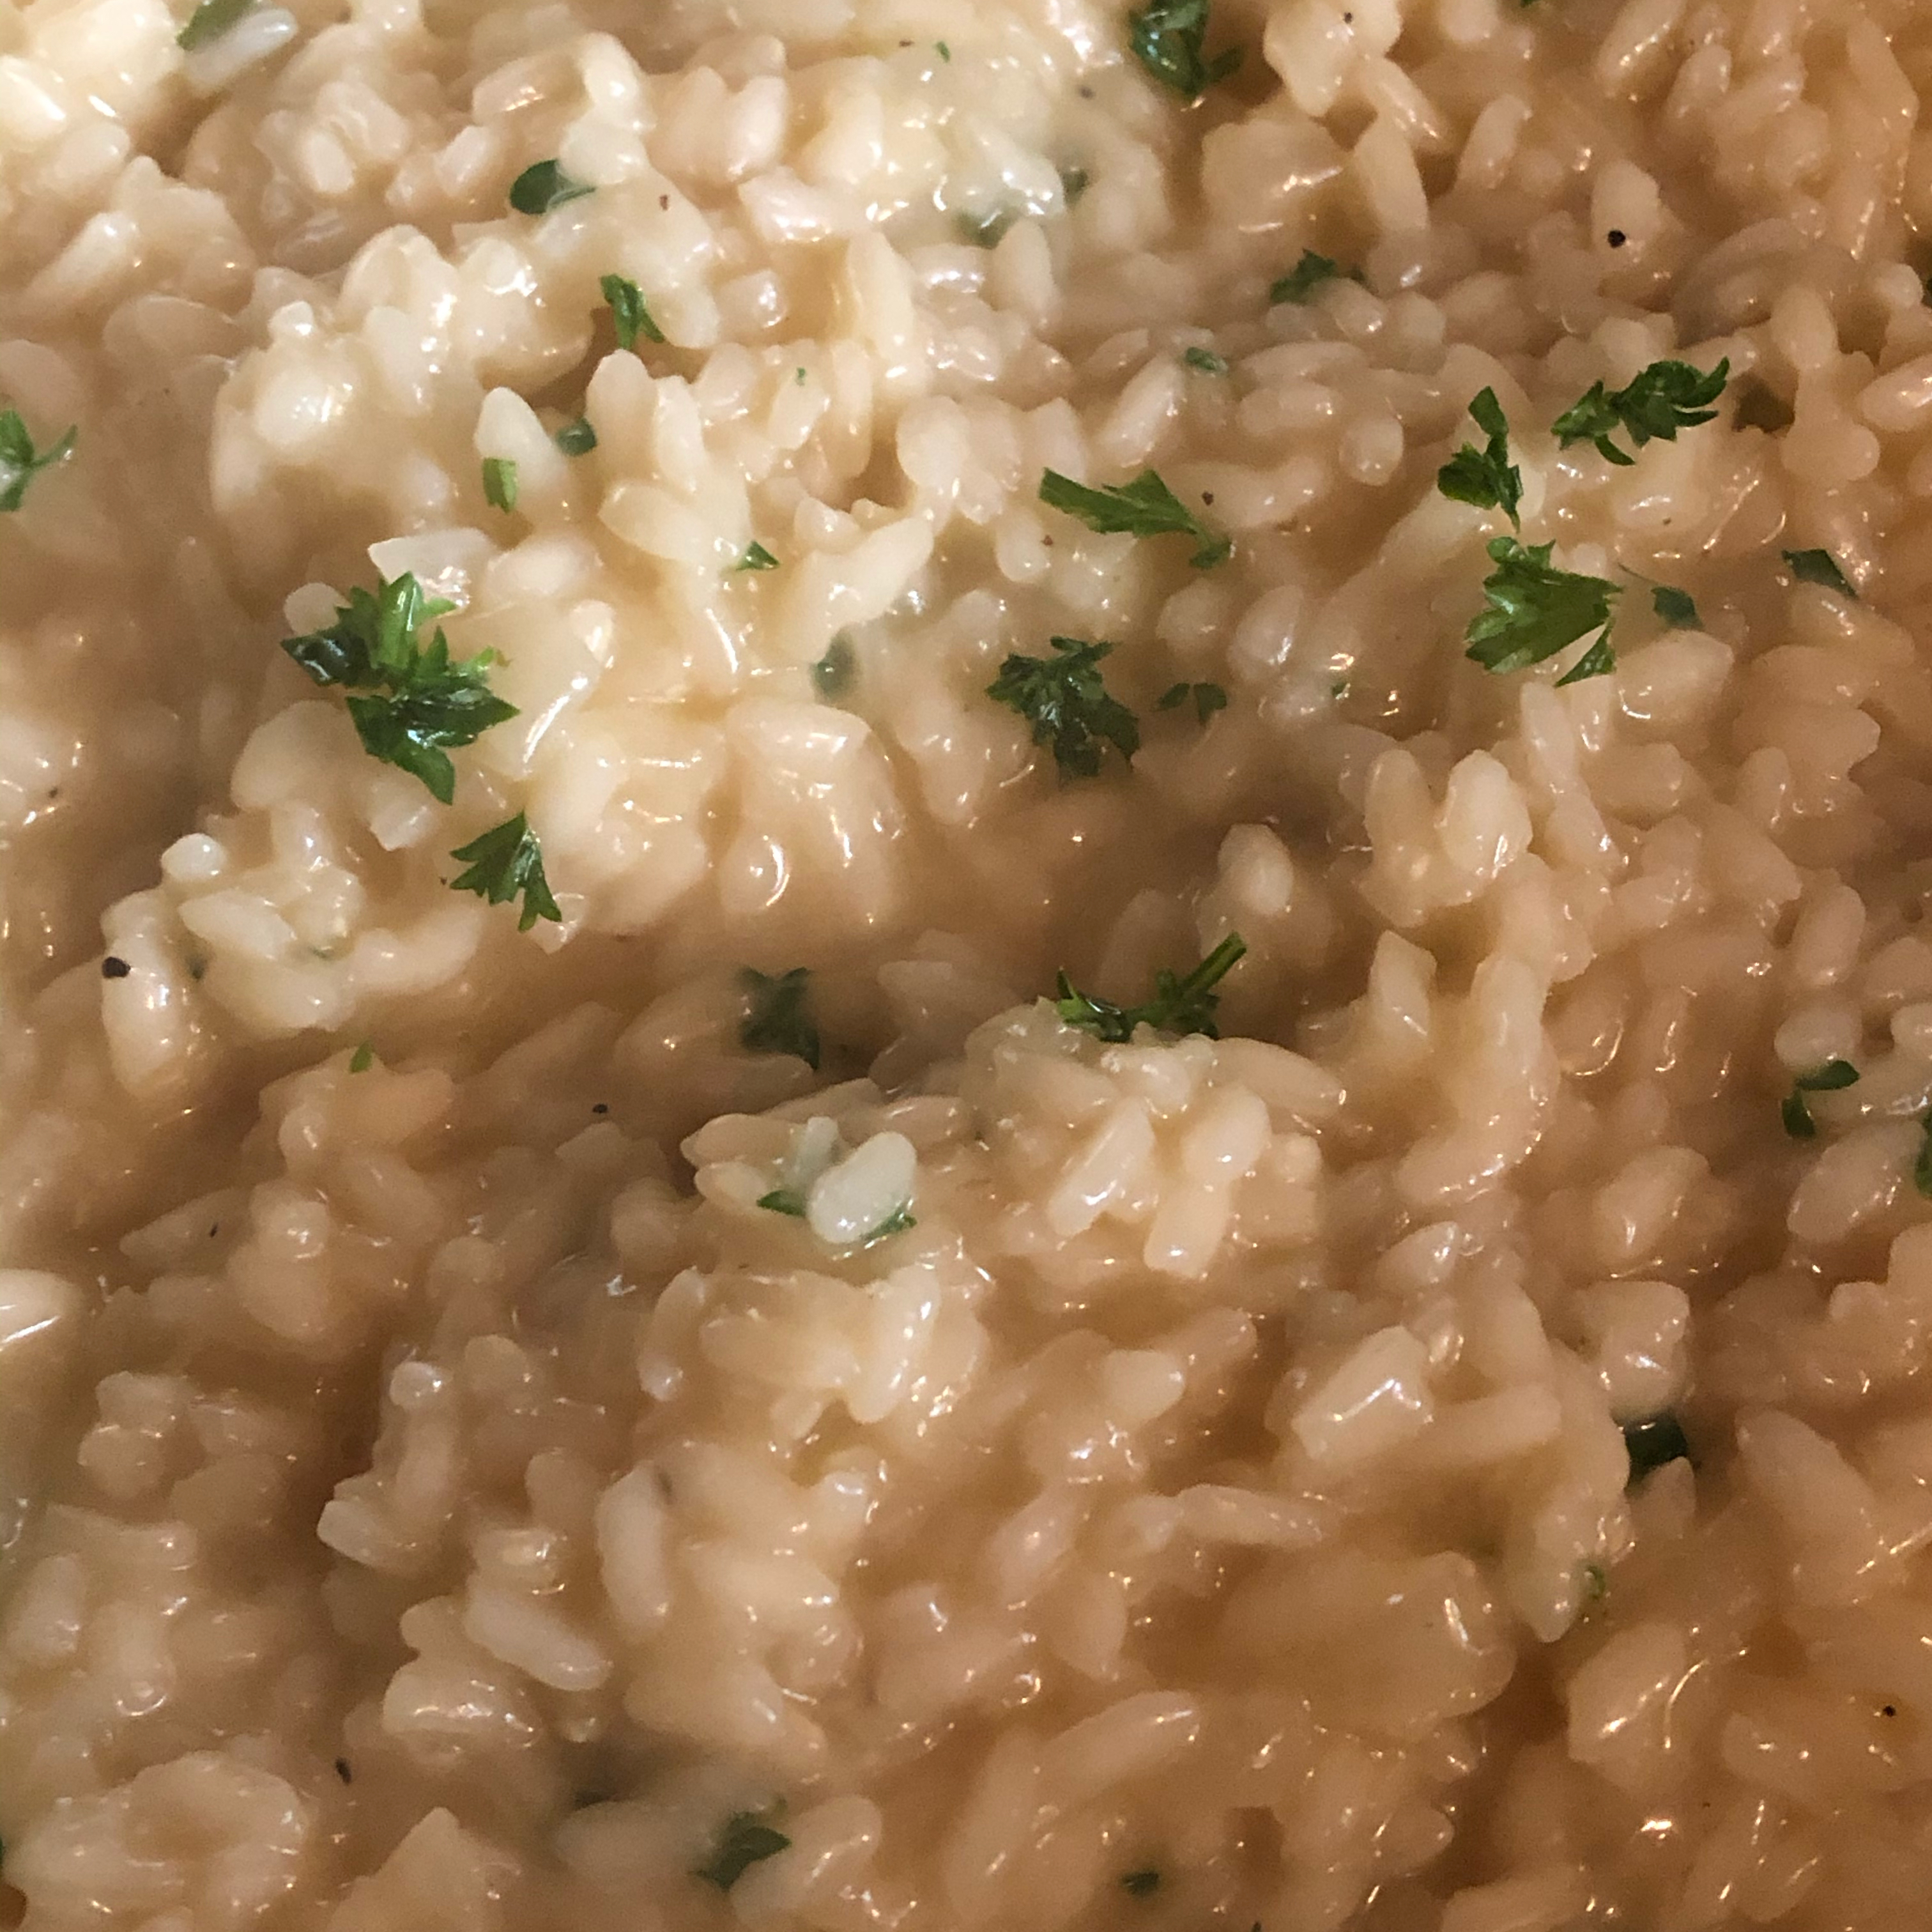 Indulge in Truffle-Parmesan Risotto Delight!